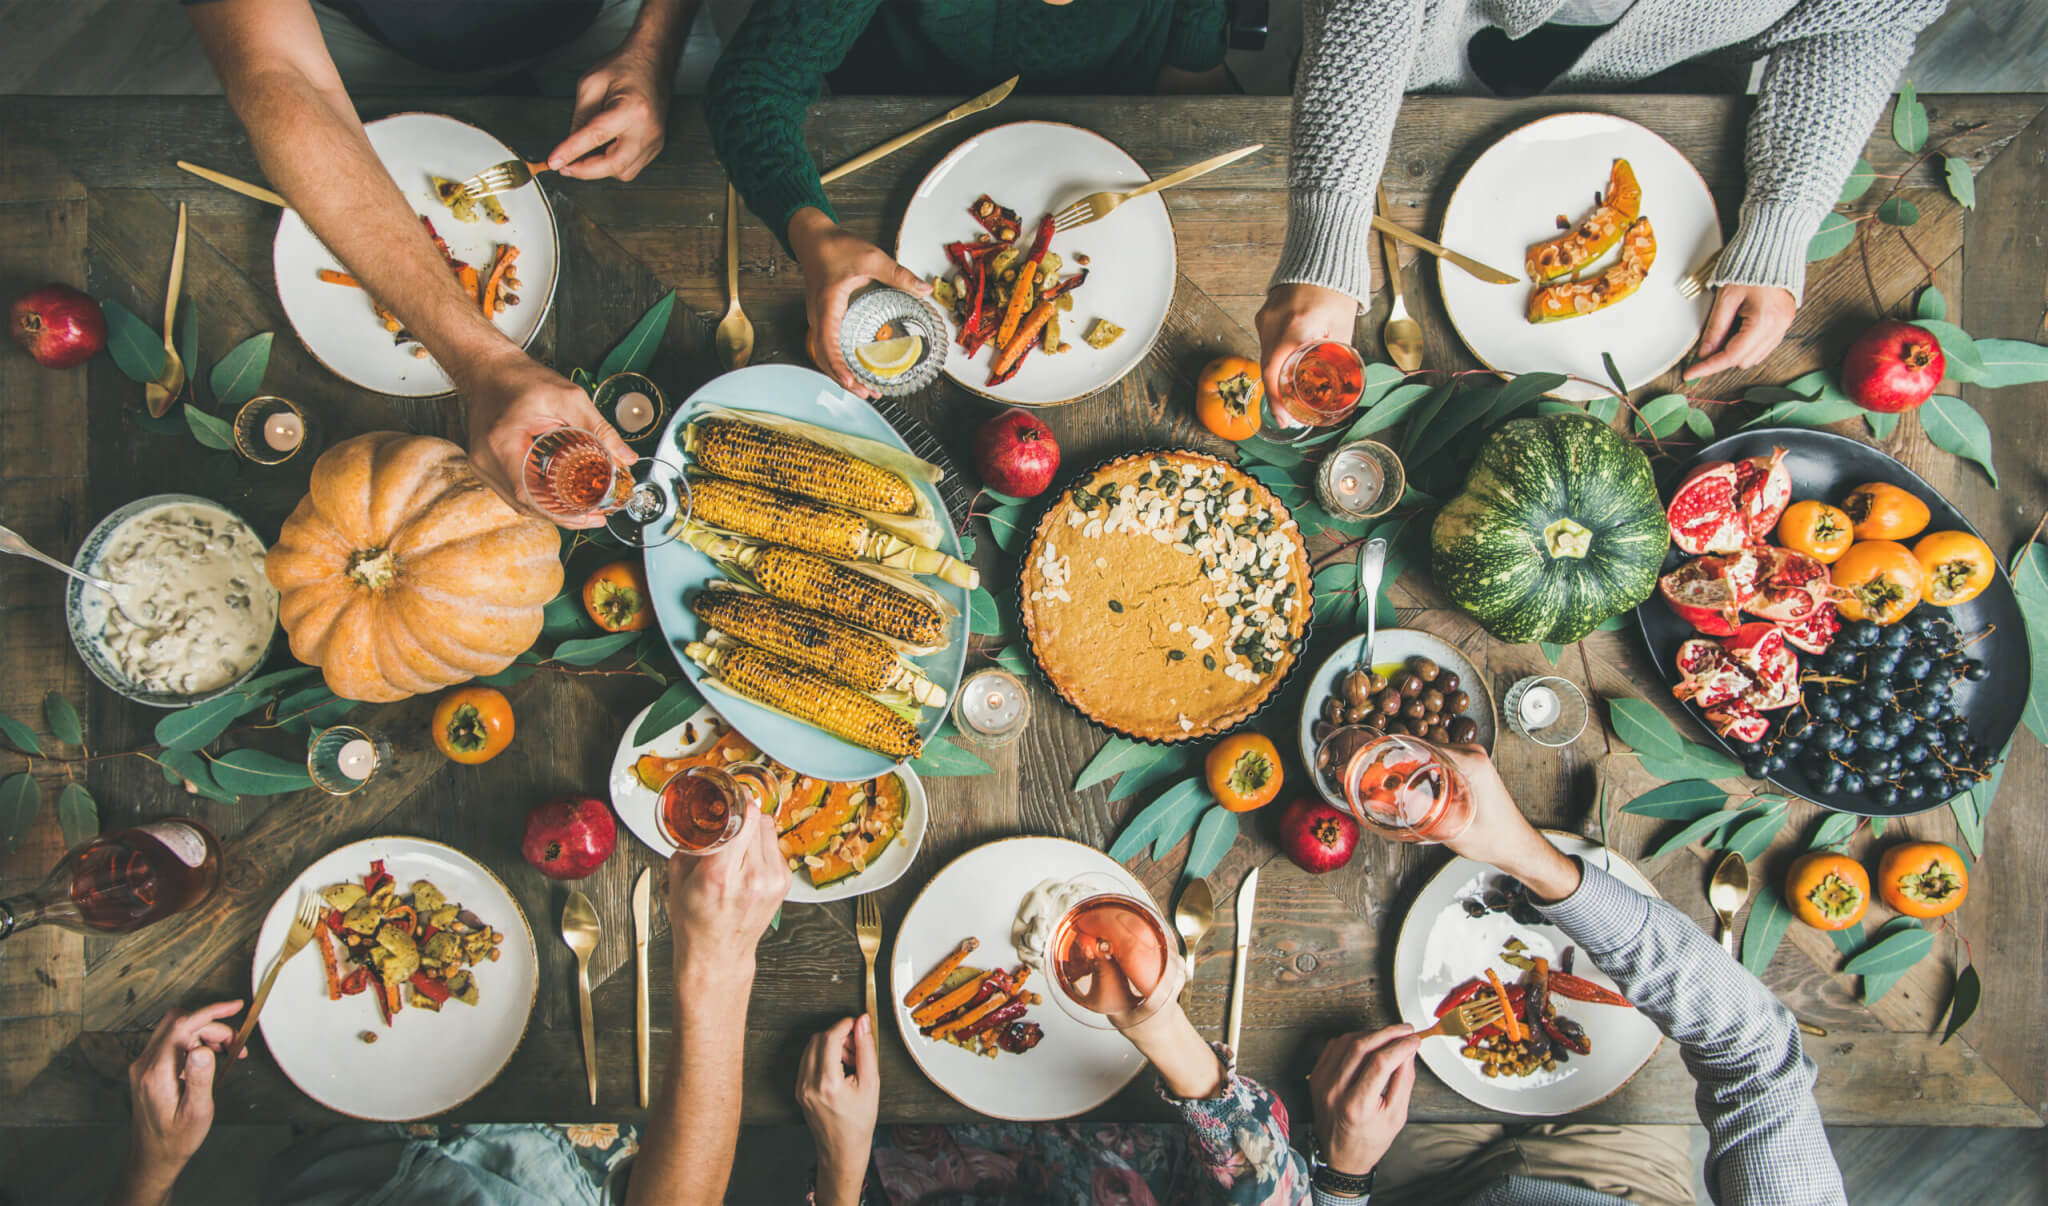 How to Host the BEST Friendsgiving Ever! - Mama Cheaps®